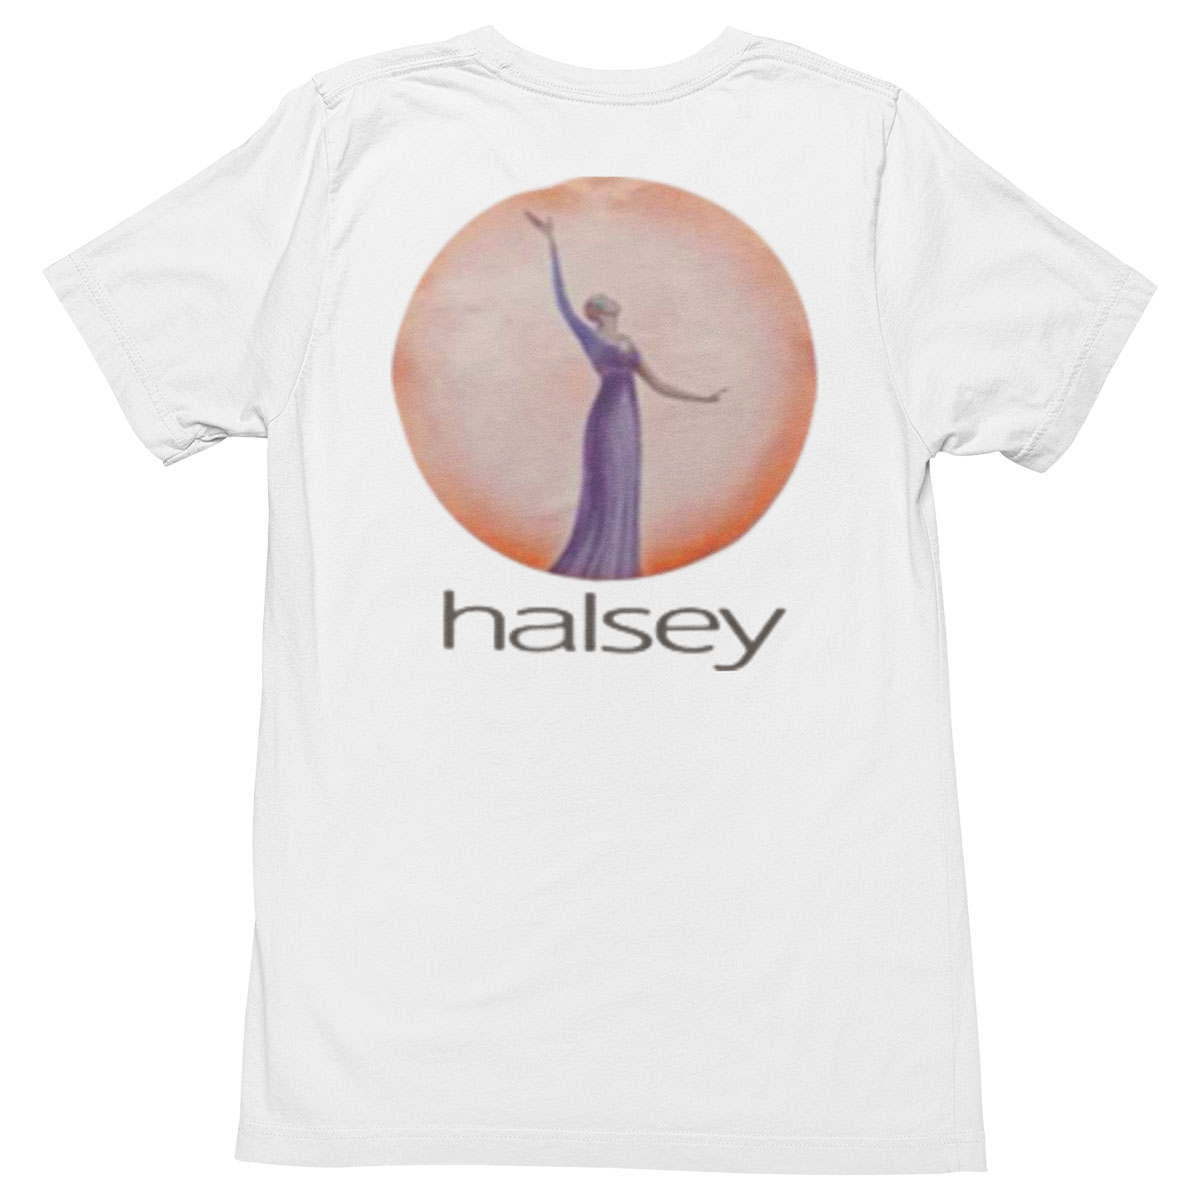 Halsey Adult Fit Tee with Circle Design image number 2